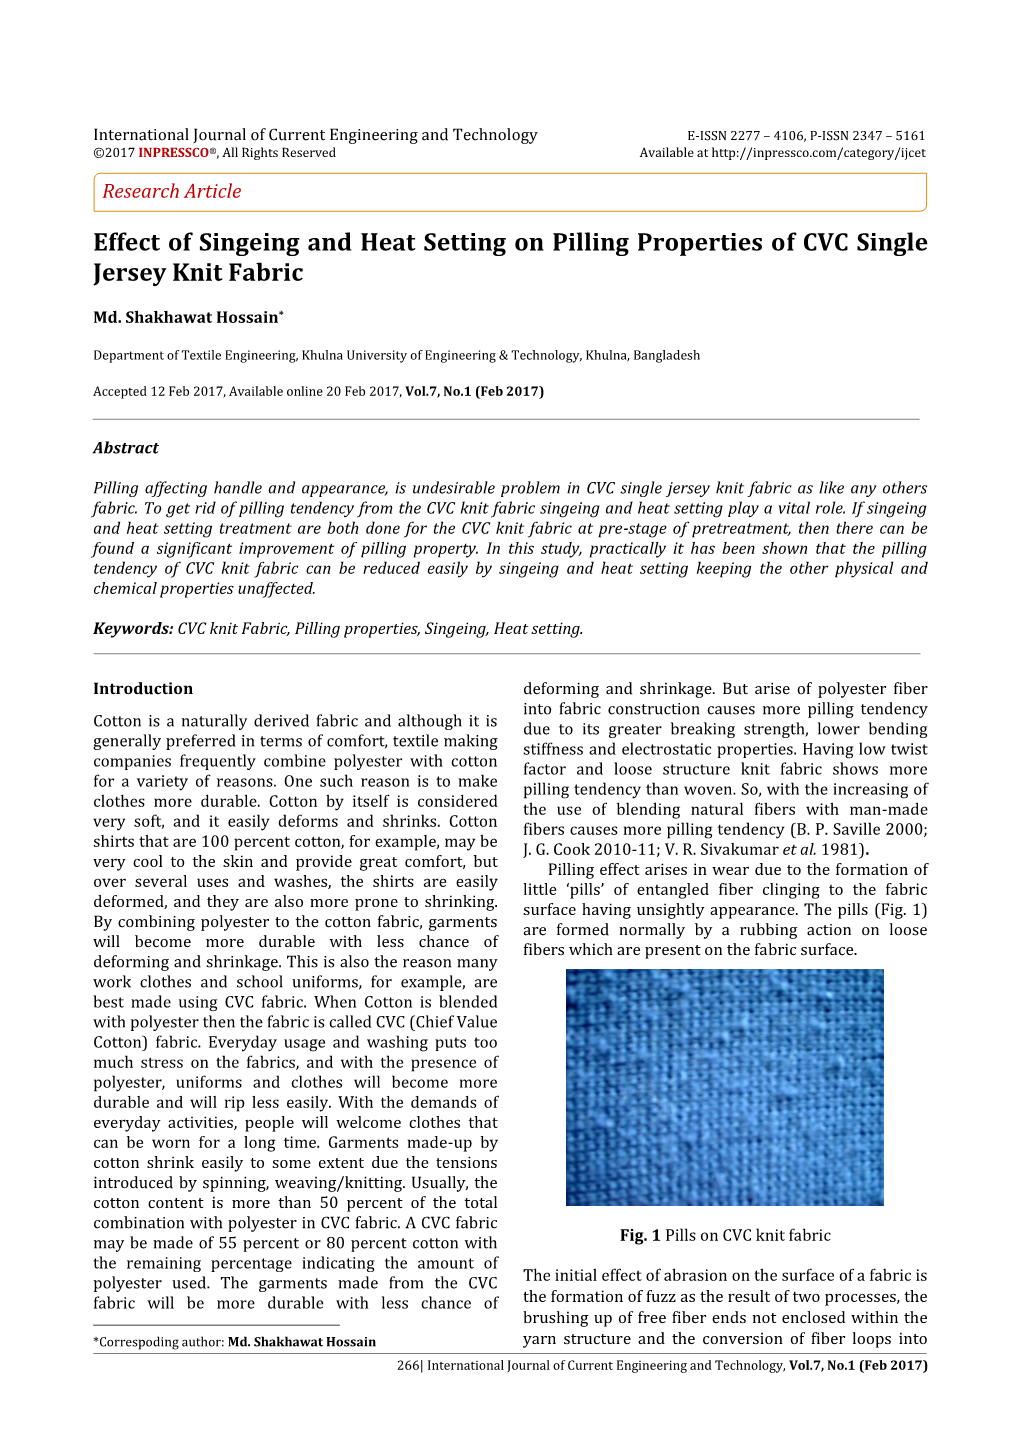 Effect of Singeing and Heat Setting on Pilling Properties of CVC Single Jersey Knit Fabric